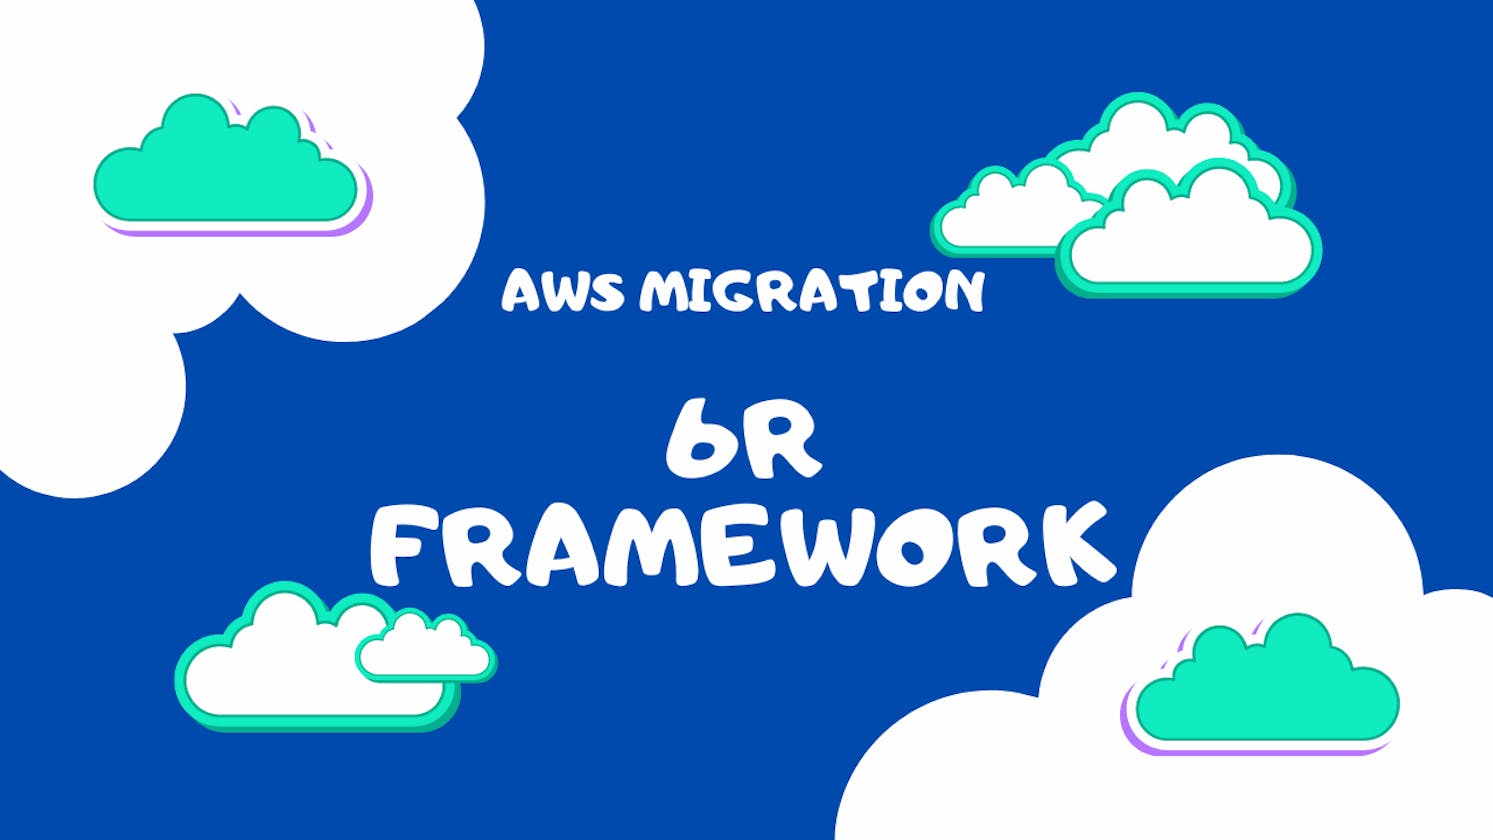 The AWS Migration 6R Framework serves as a systematic roadmap 🥳🥳